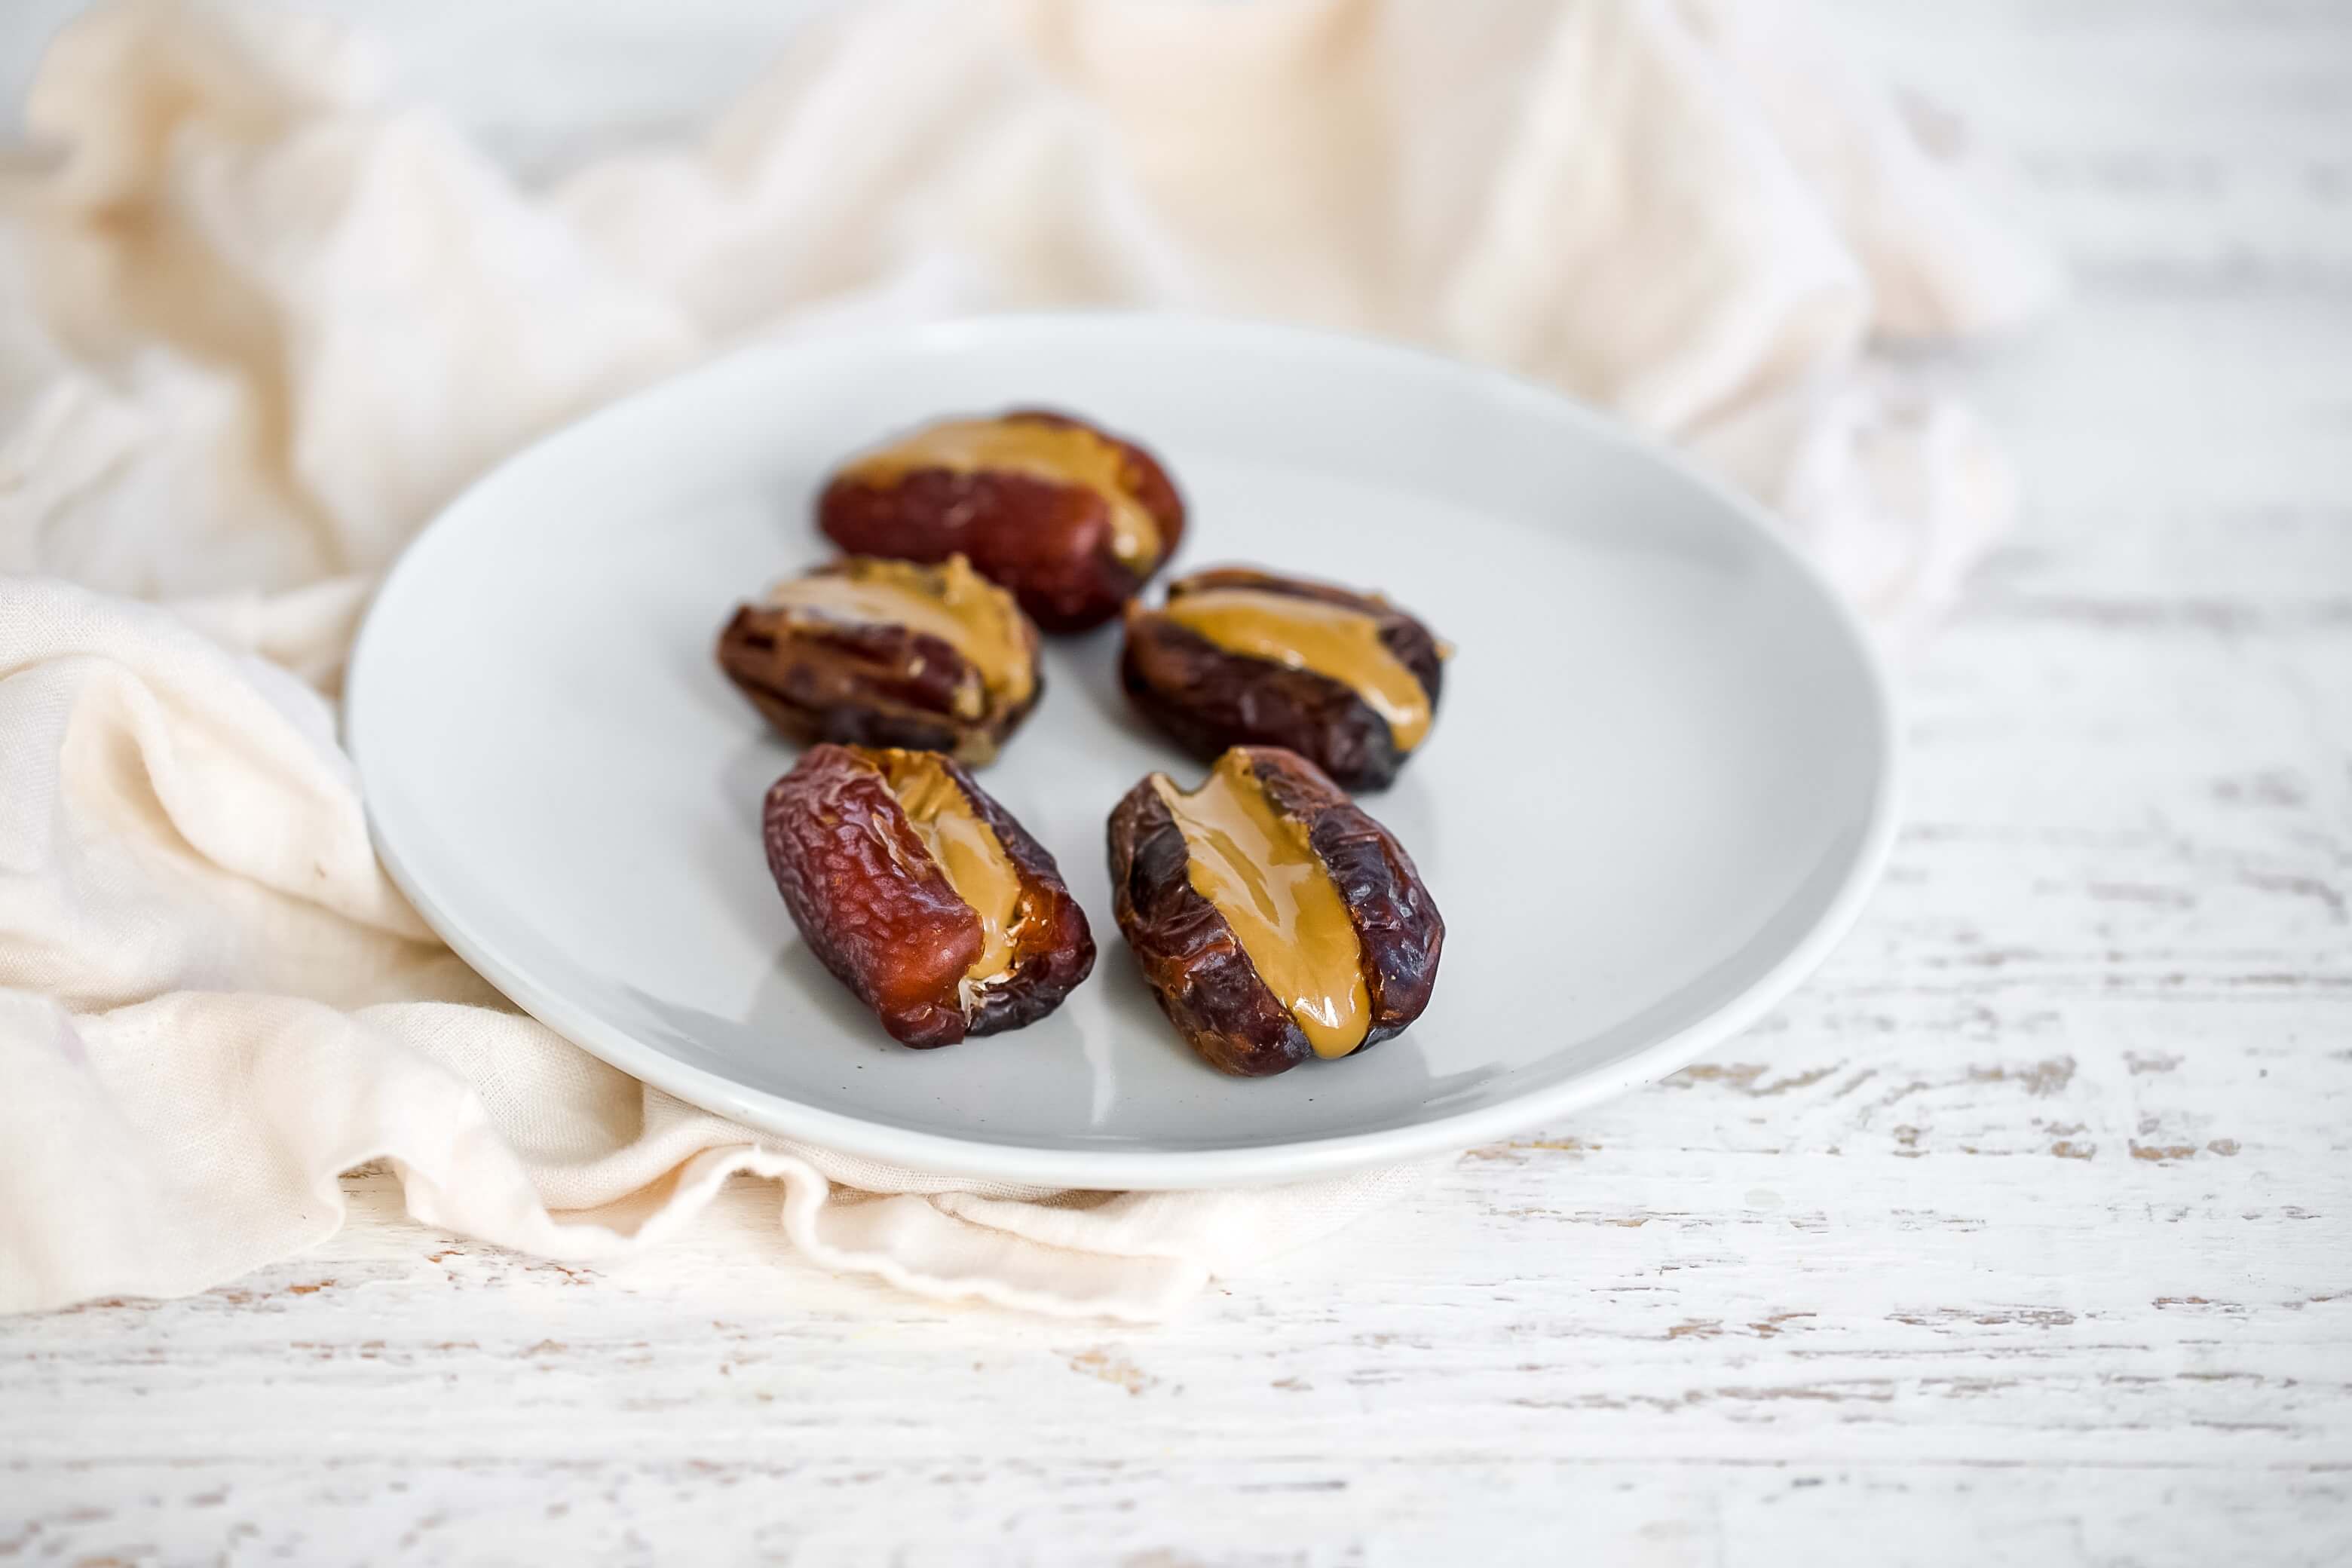 20 Meals Ideas for Kid-Friendly Meal Plans: Sunflower Seed Butter Stuffed Dates